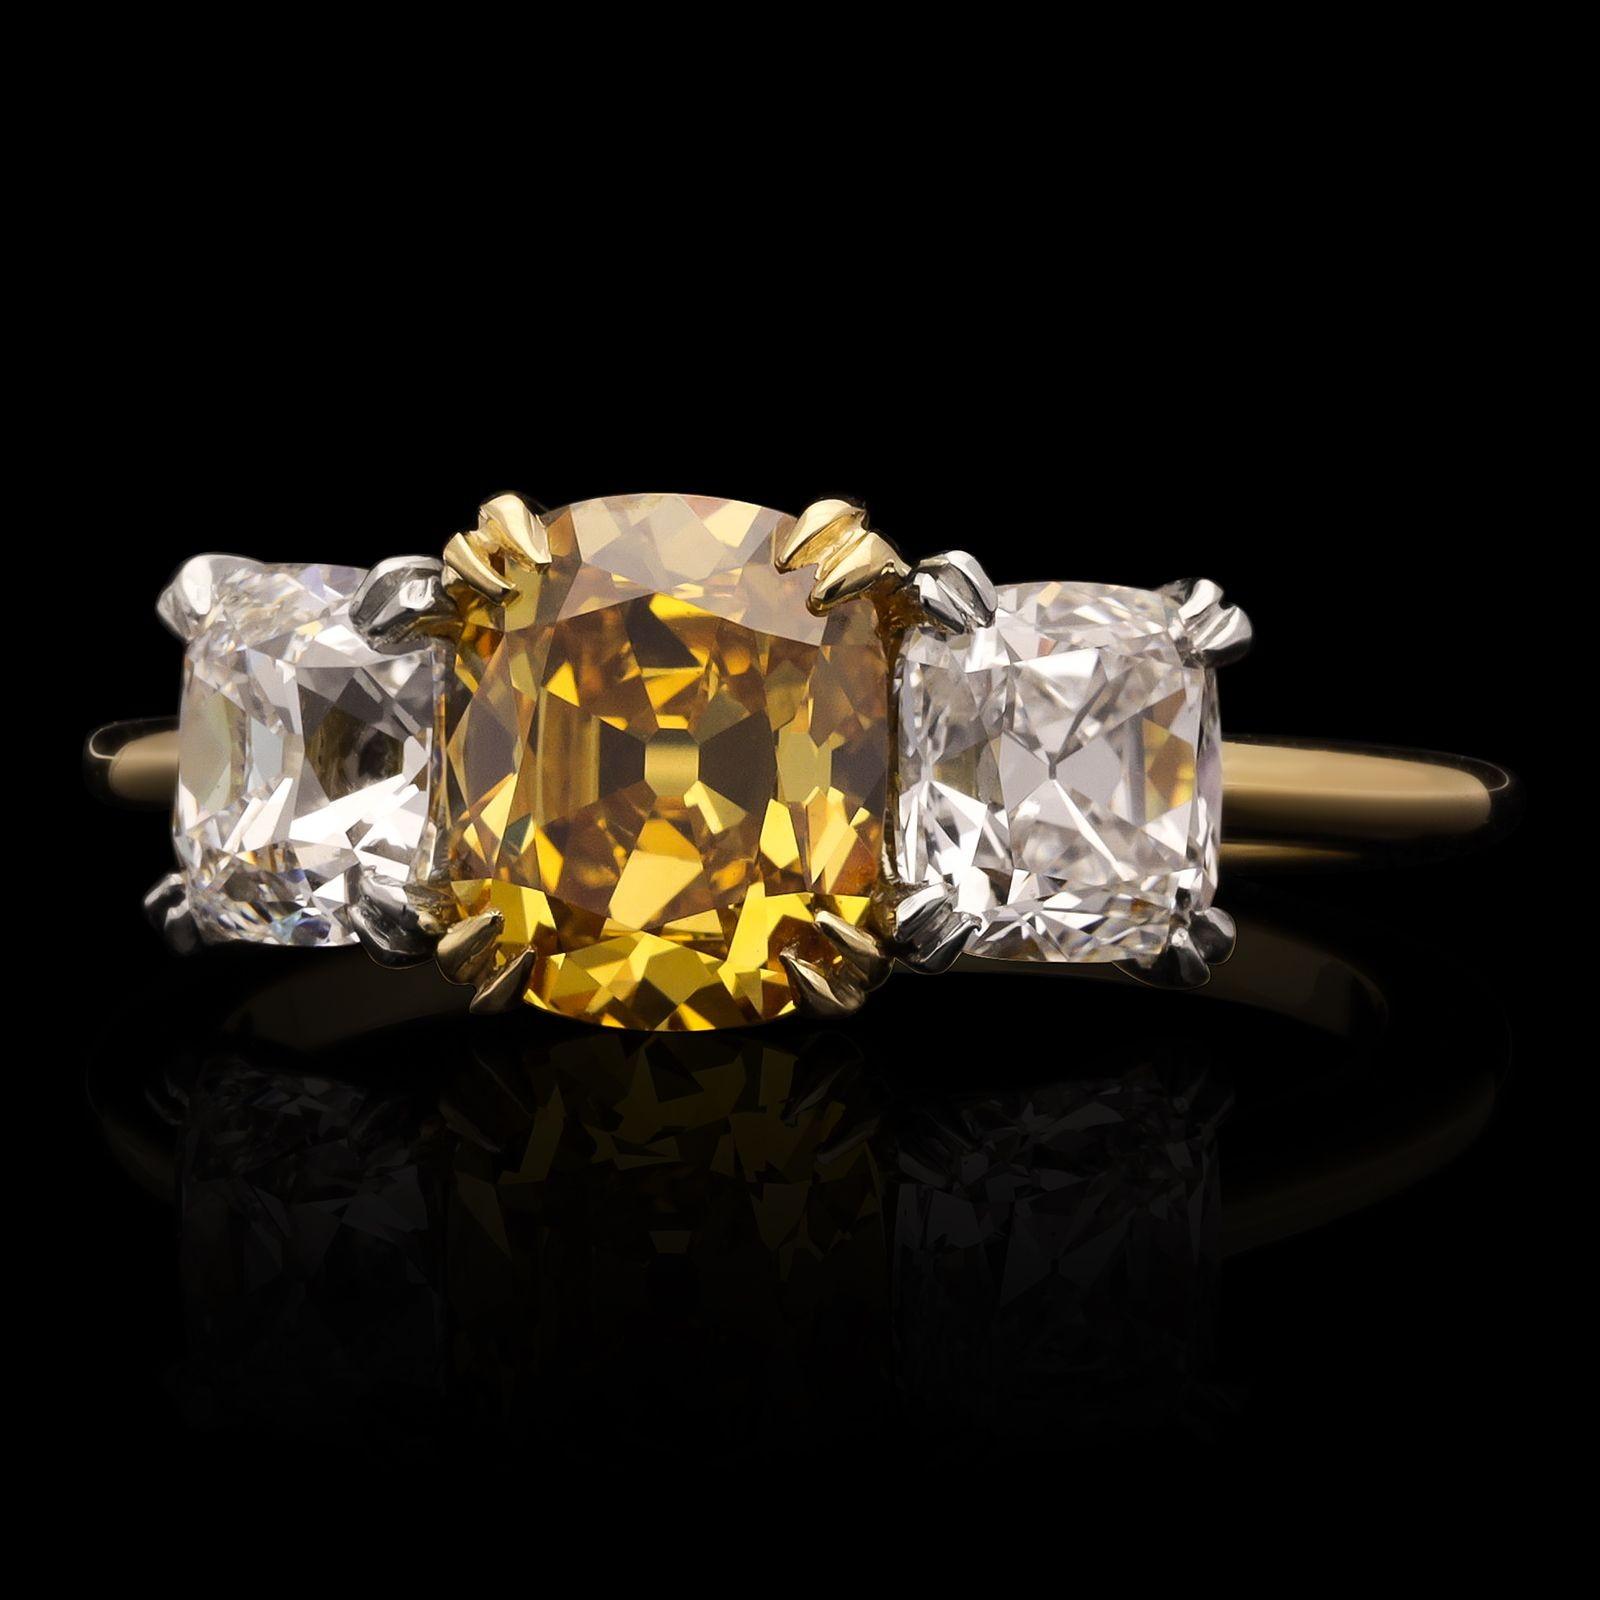 A beautiful old cut fancy coloured diamond and white diamond three stone ring by Hancocks, centred with a wonderful old mine brilliant cut diamond weighing 1.42cts and of Fancy Deep Orange Yellow colour and VS2 clarity, claw set in 18ct yellow gold